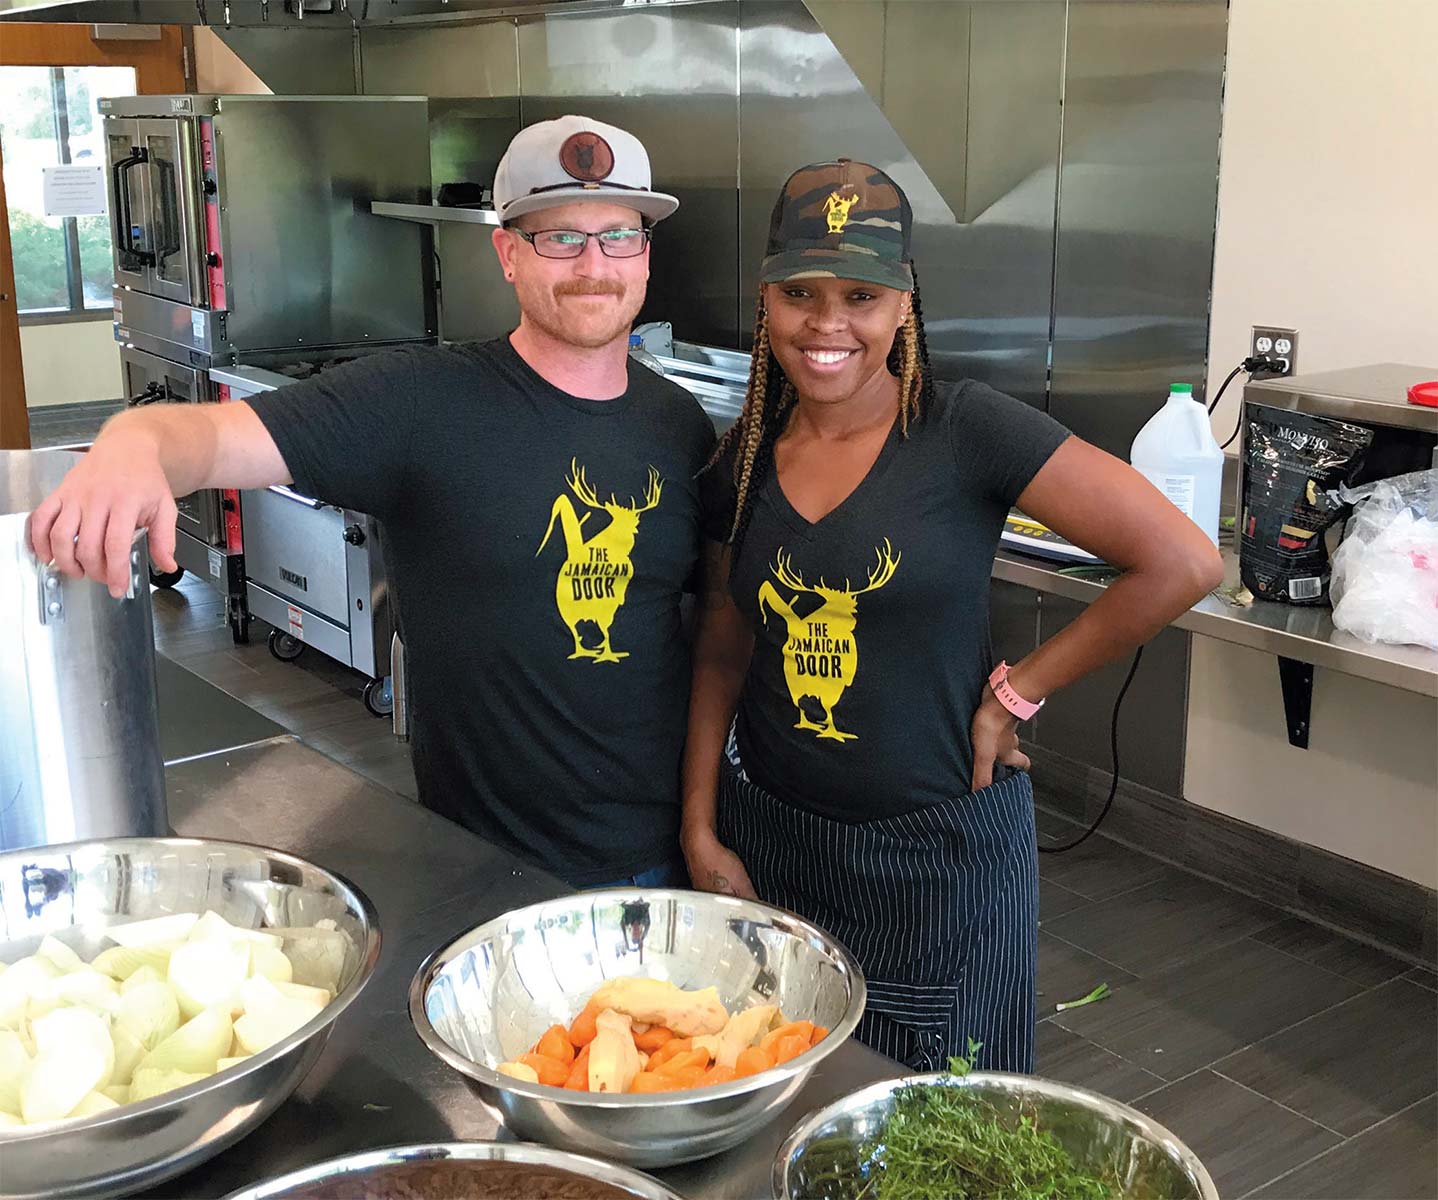 Carlin and Georgina Hatch making a new batch of their Jamaican Door jerk sauce in the the new NWTC kitchen in Sister Bay.